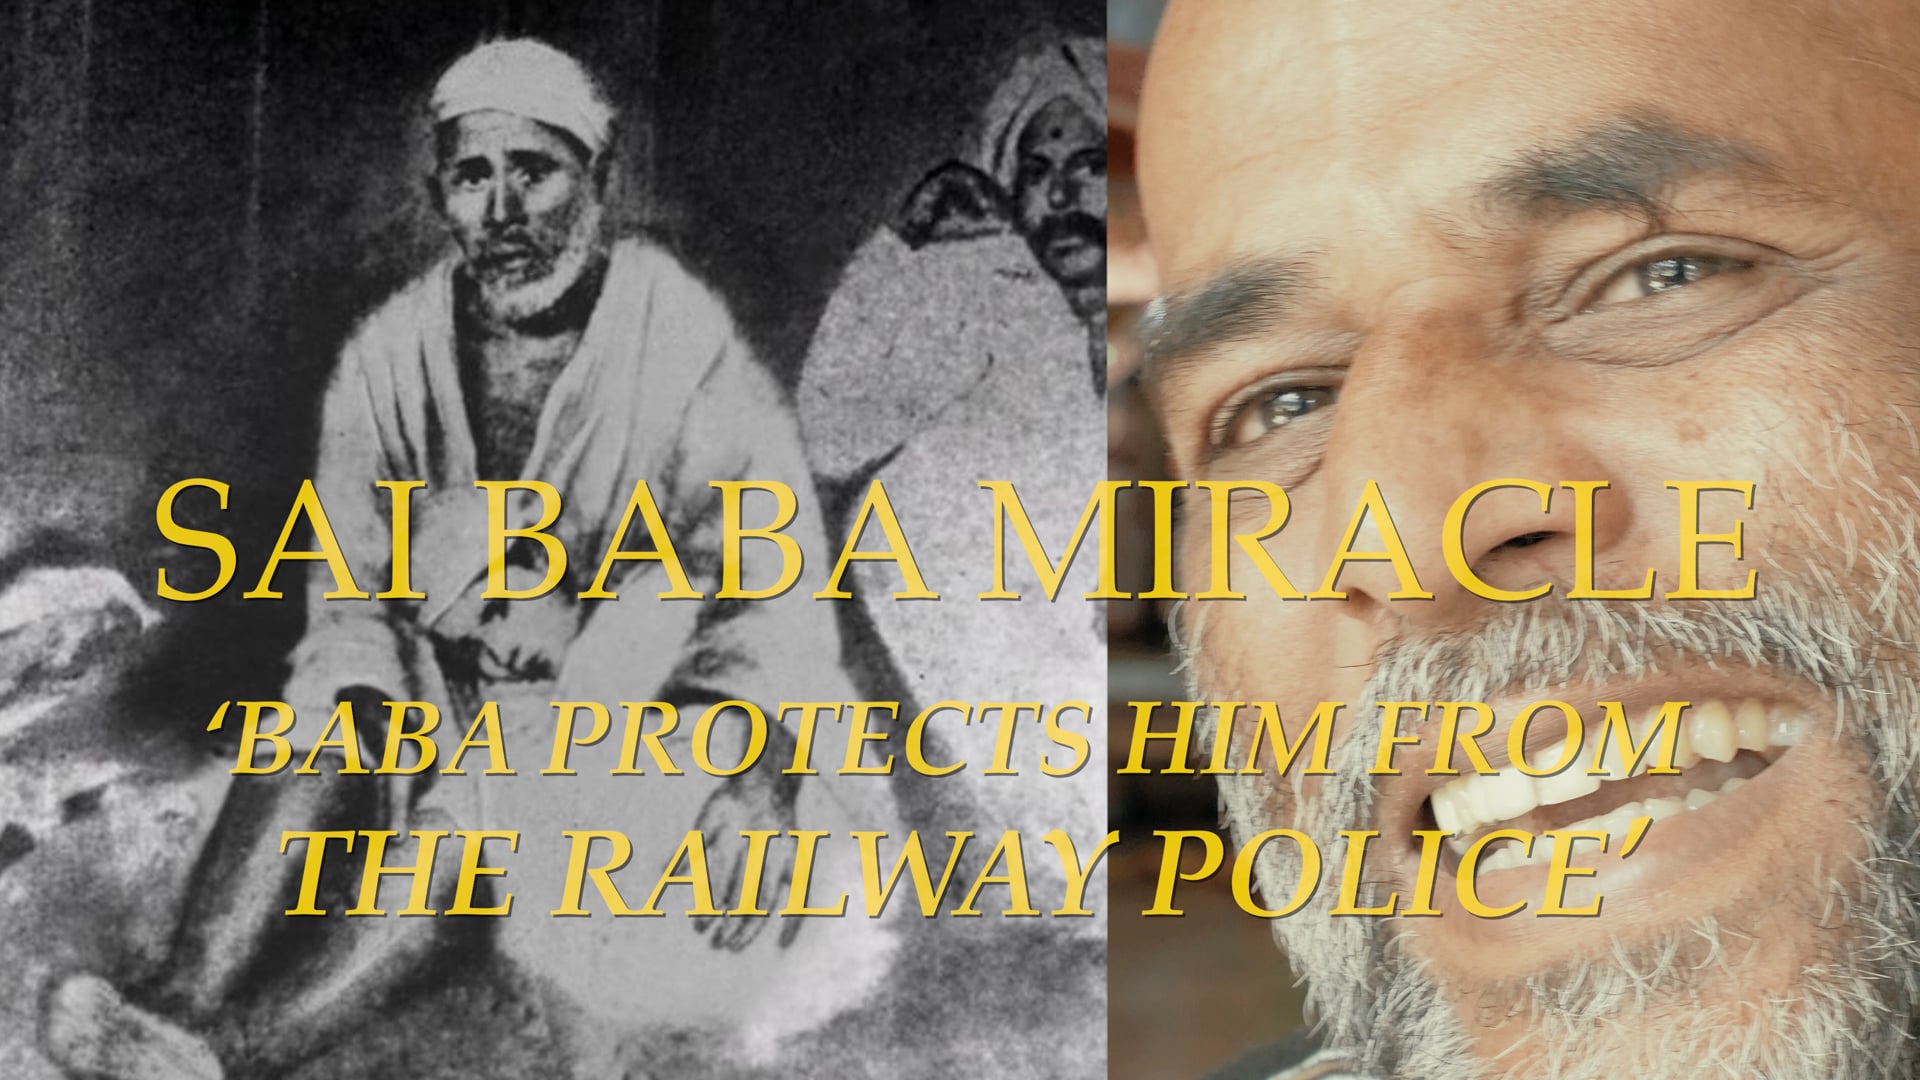 Baba saves a devotee from the Railway Police